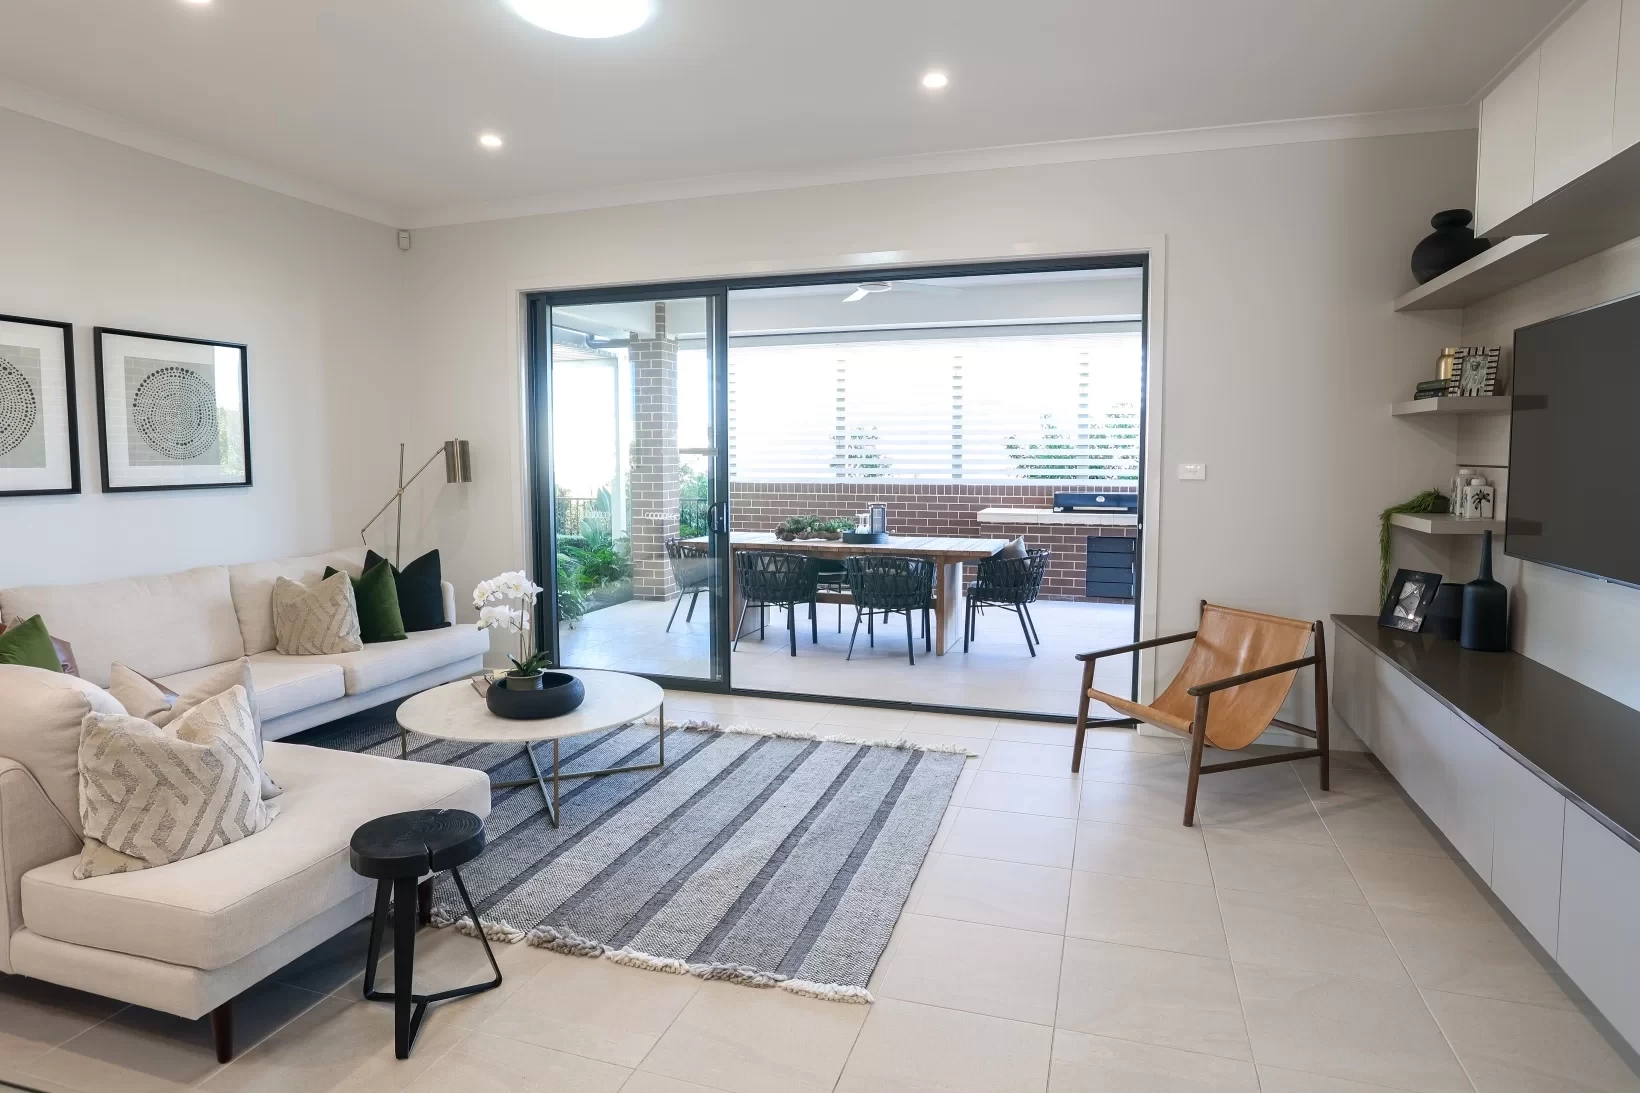 nsw Display-Homes Miscellaneous-Images warnervale-sohar-23-04